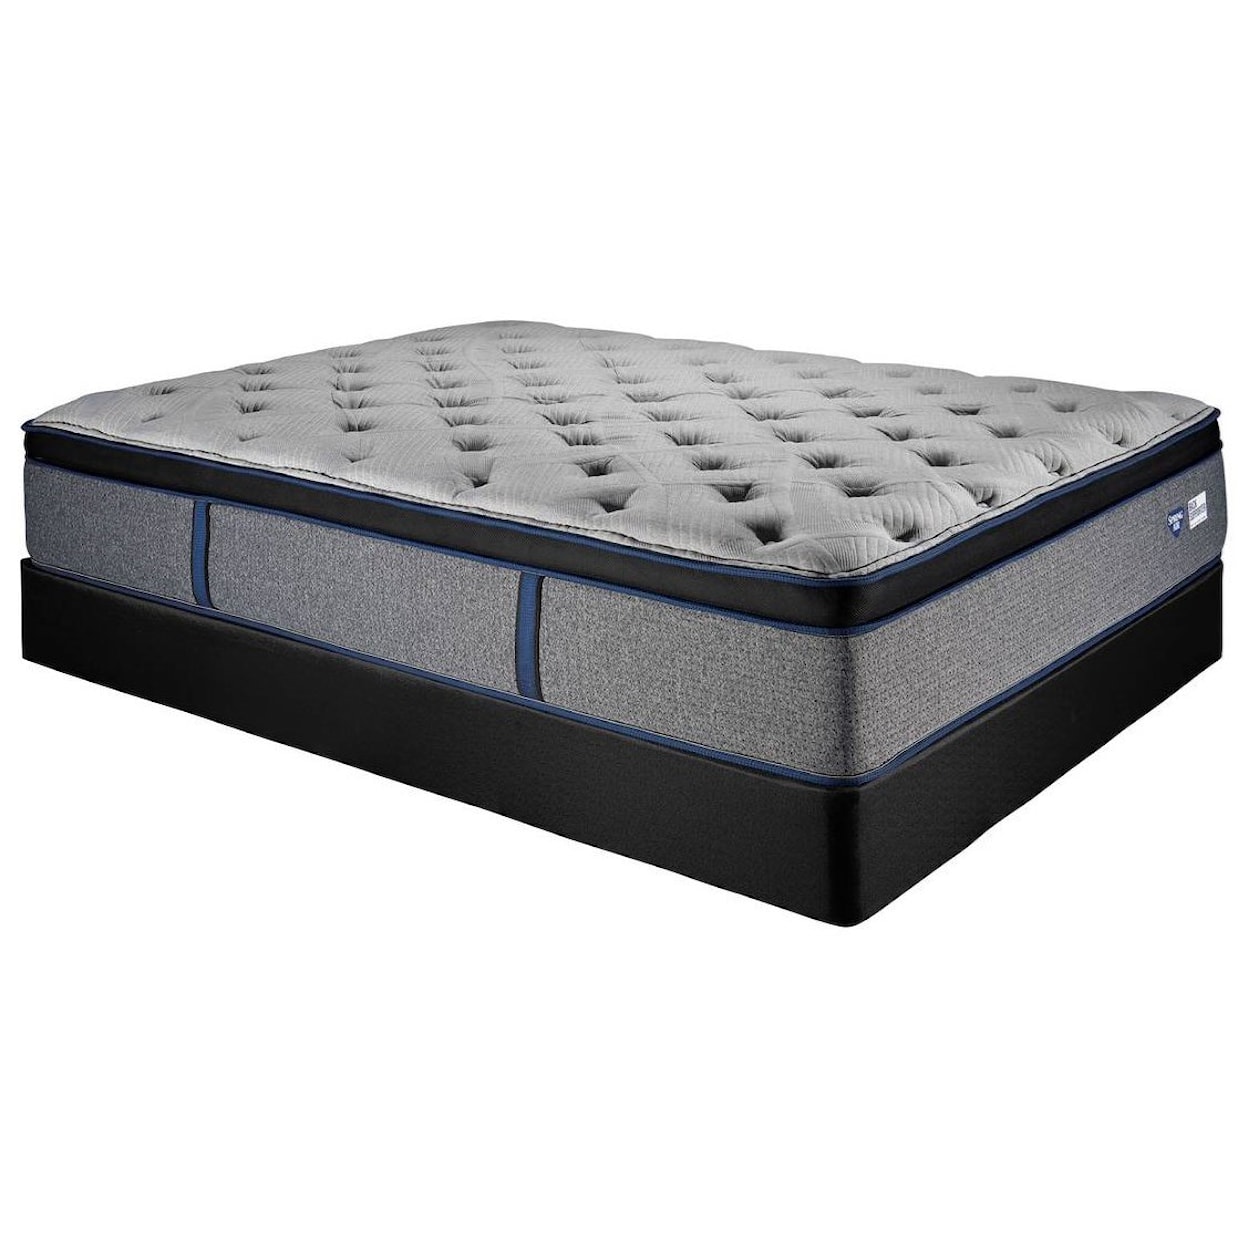 Spring Air Calypso ET Queen Pocketed Coil Mattress Low Pro Set